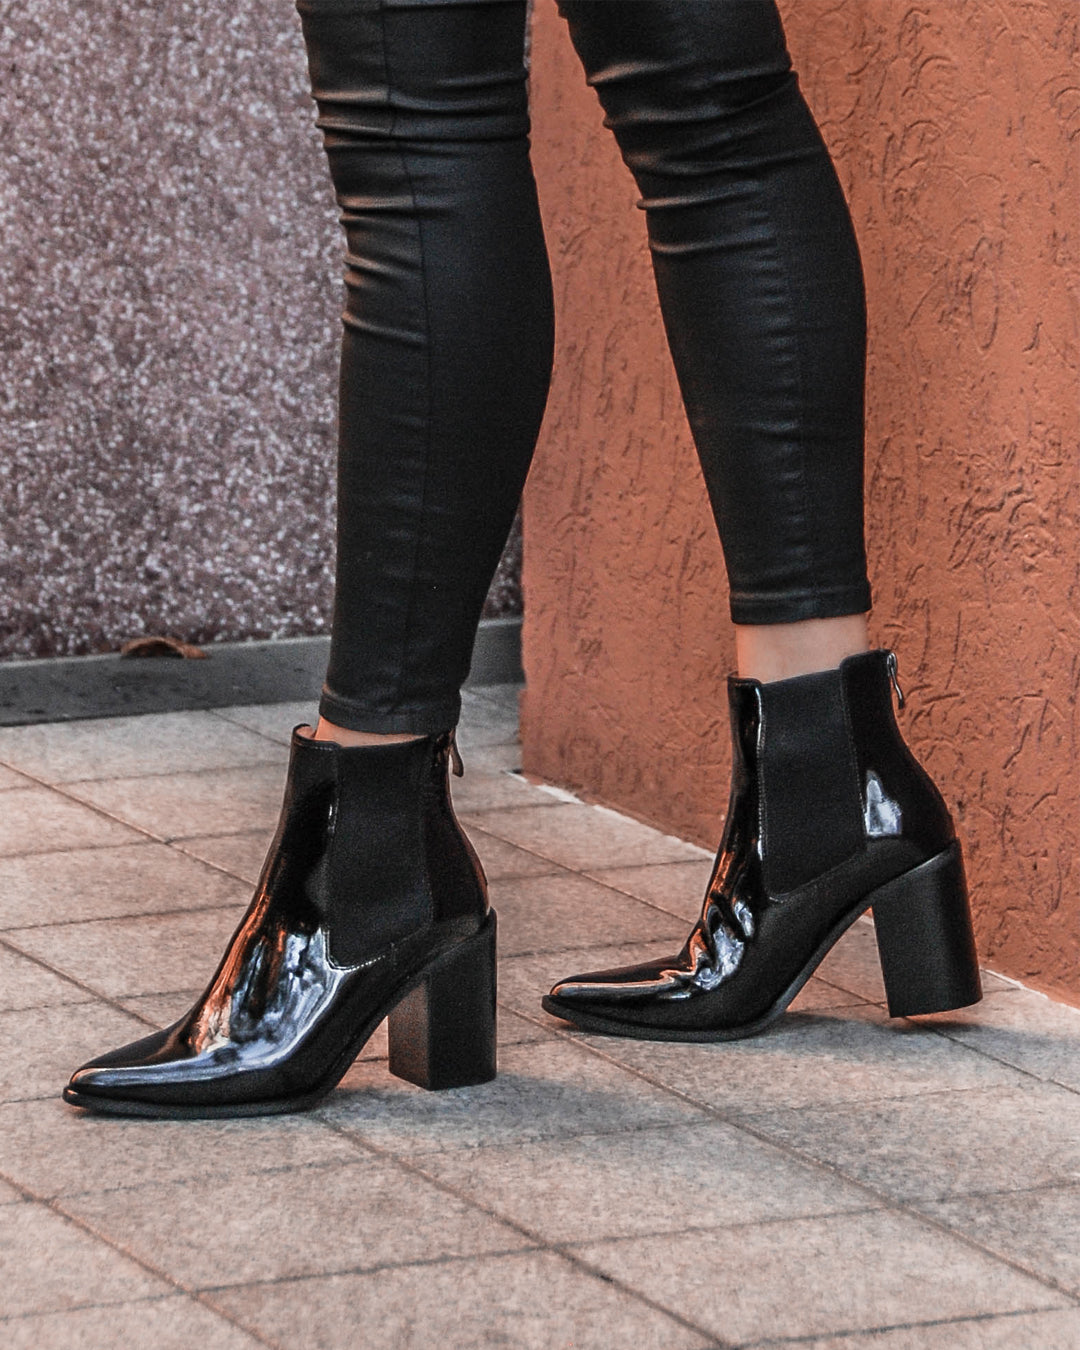 shiny patent leather boots